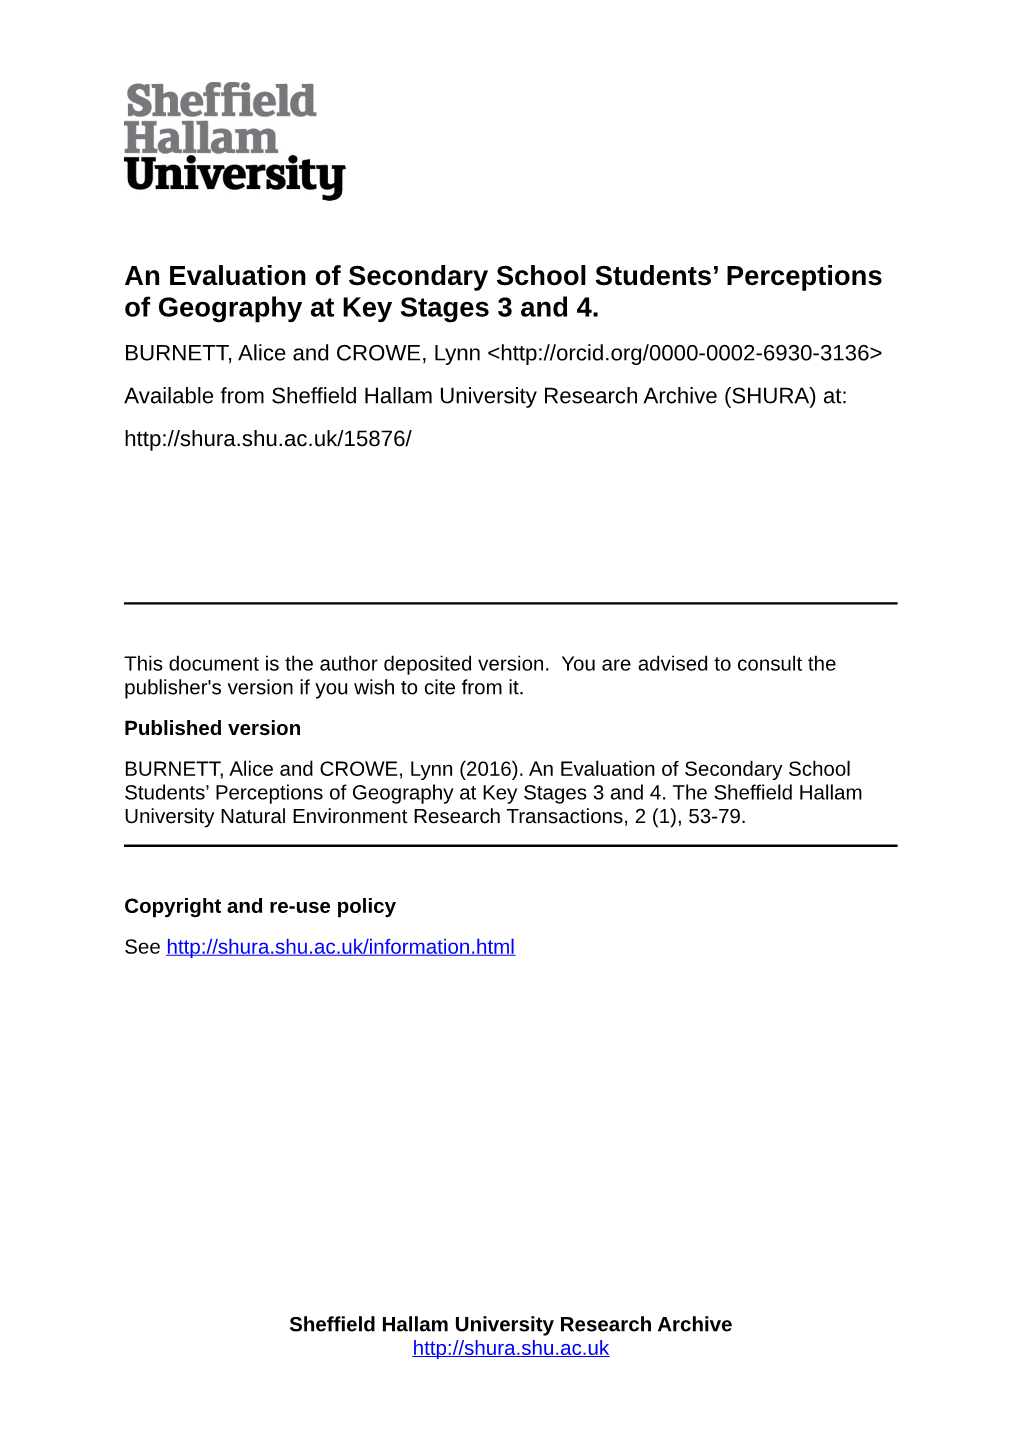 An Evaluation of Secondary School Students' Perceptions of Geography